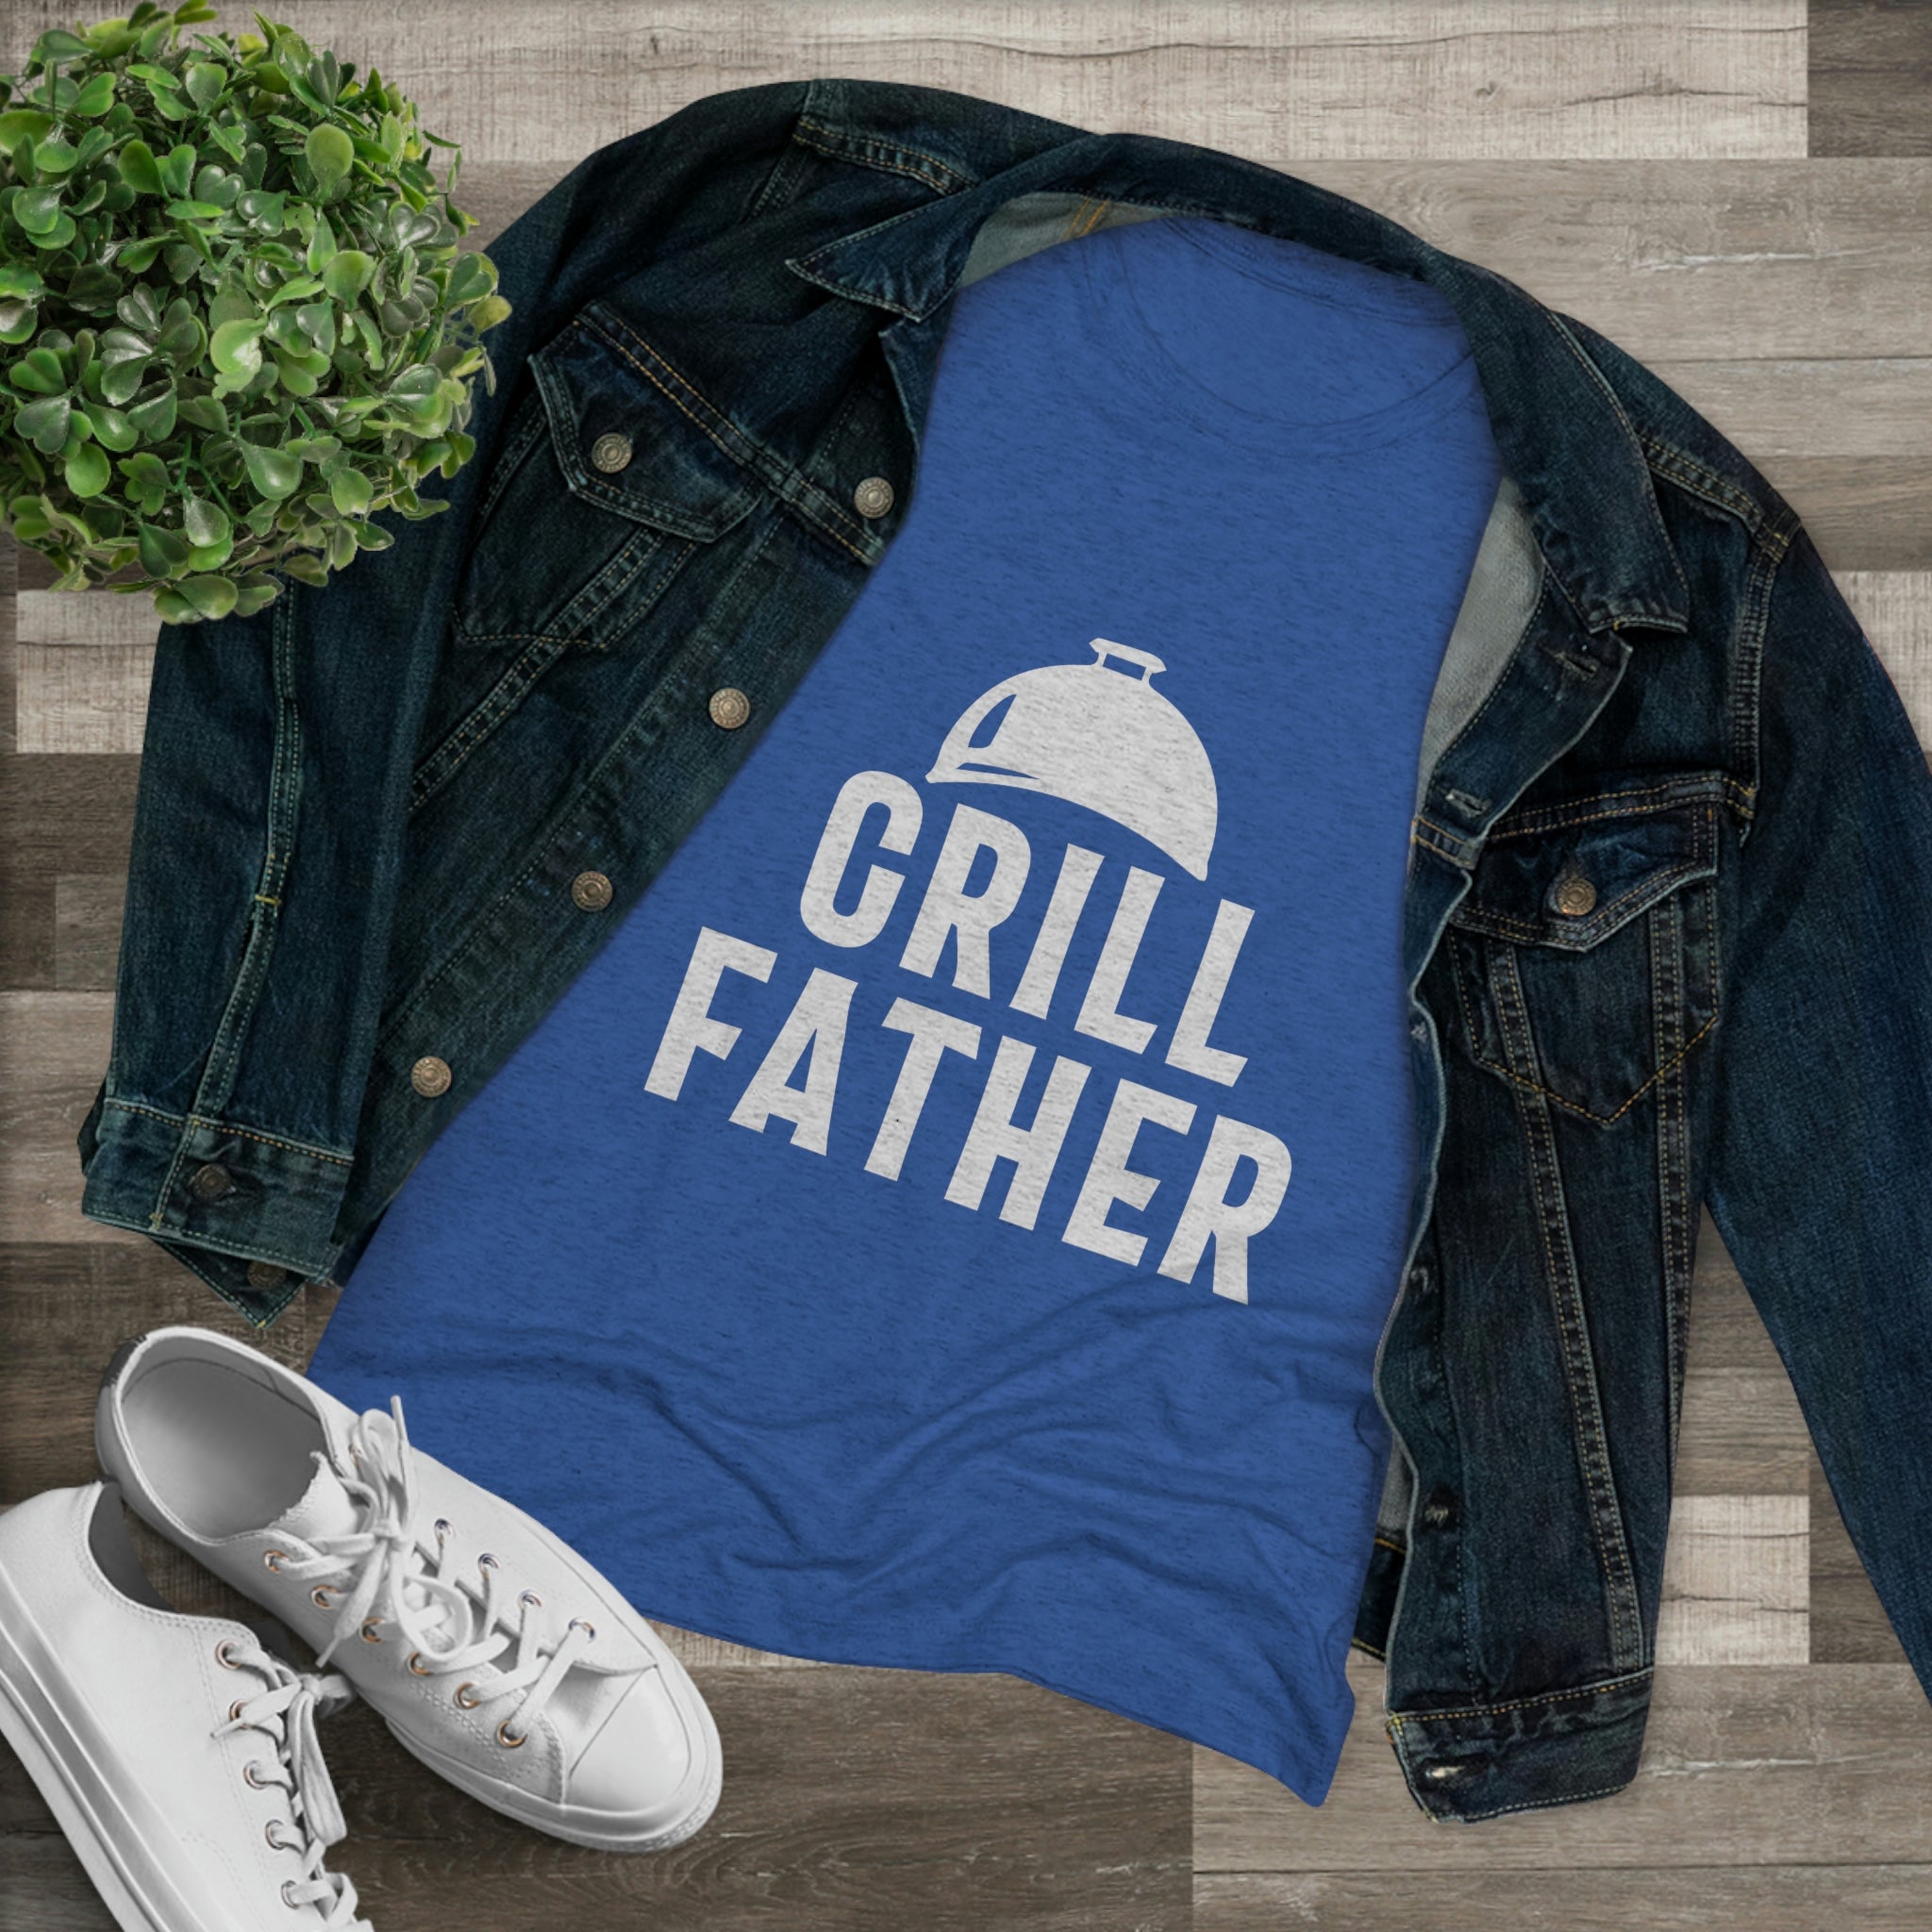 Grill Father women's shirt